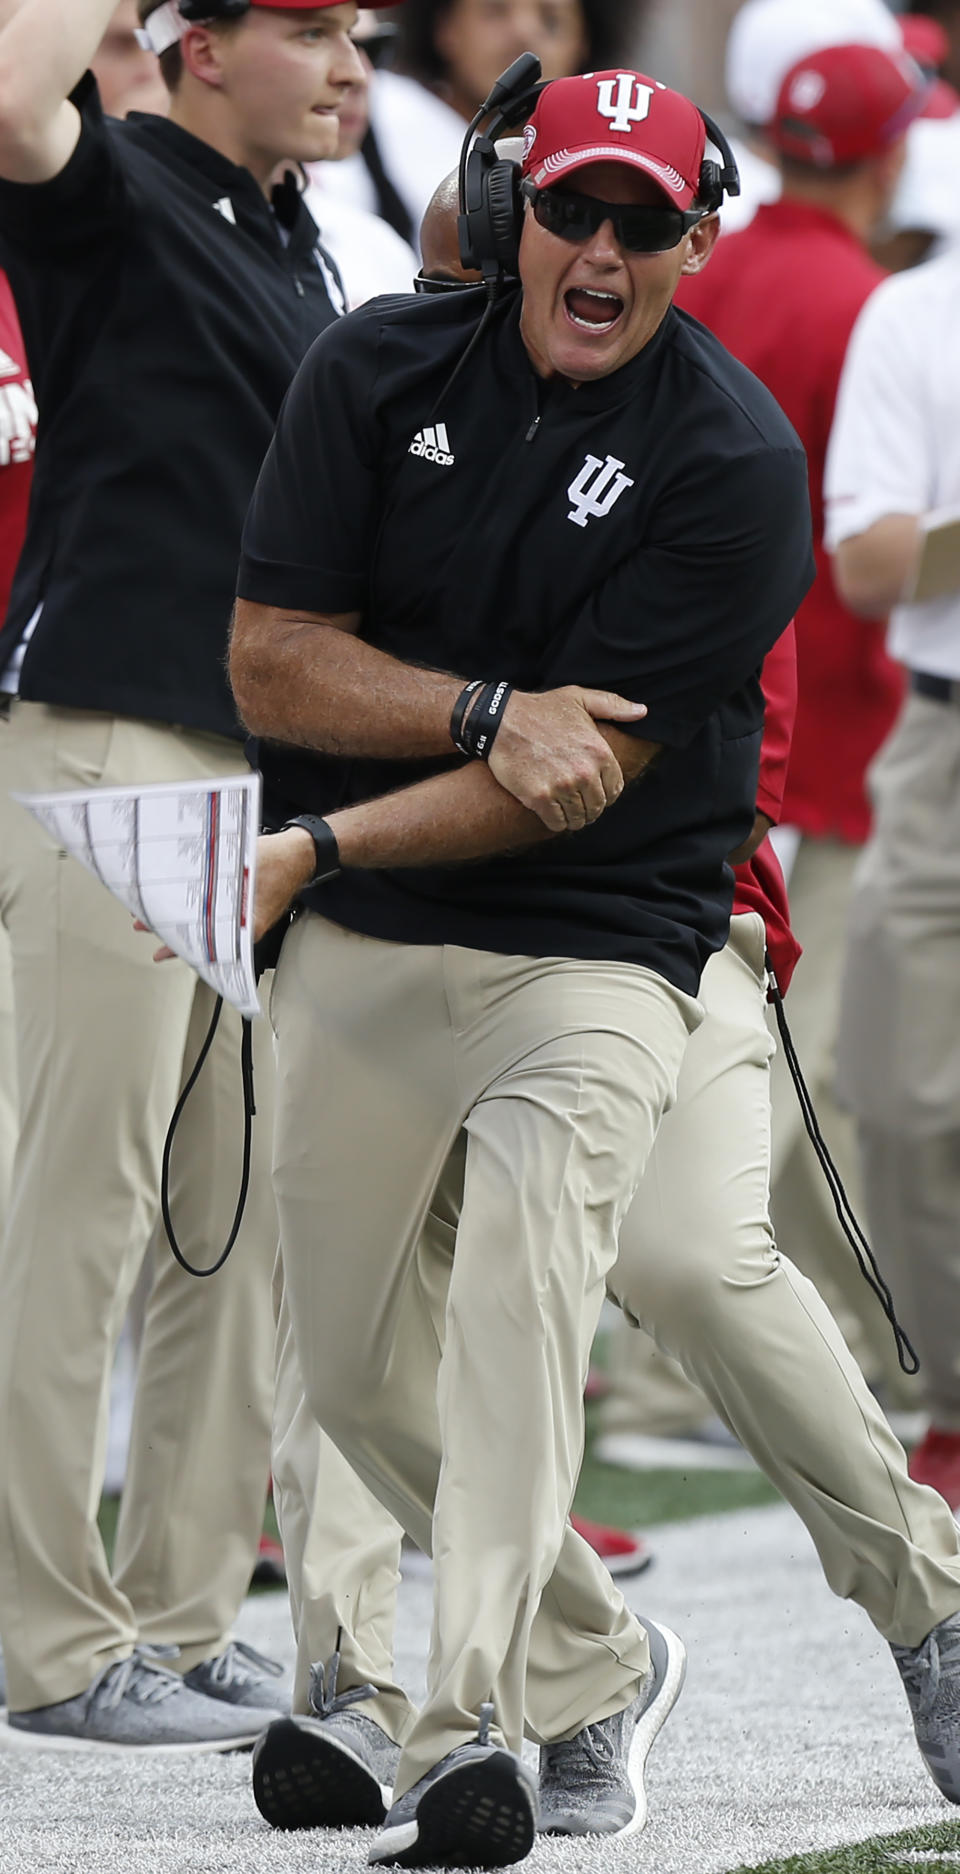 Indiana head coach Tom Allen shouts at a referee during the first half of an NCAA college football game against Ohio State, Saturday, Oct. 6, 2018, in Columbus, Ohio. (AP Photo/Jay LaPrete)